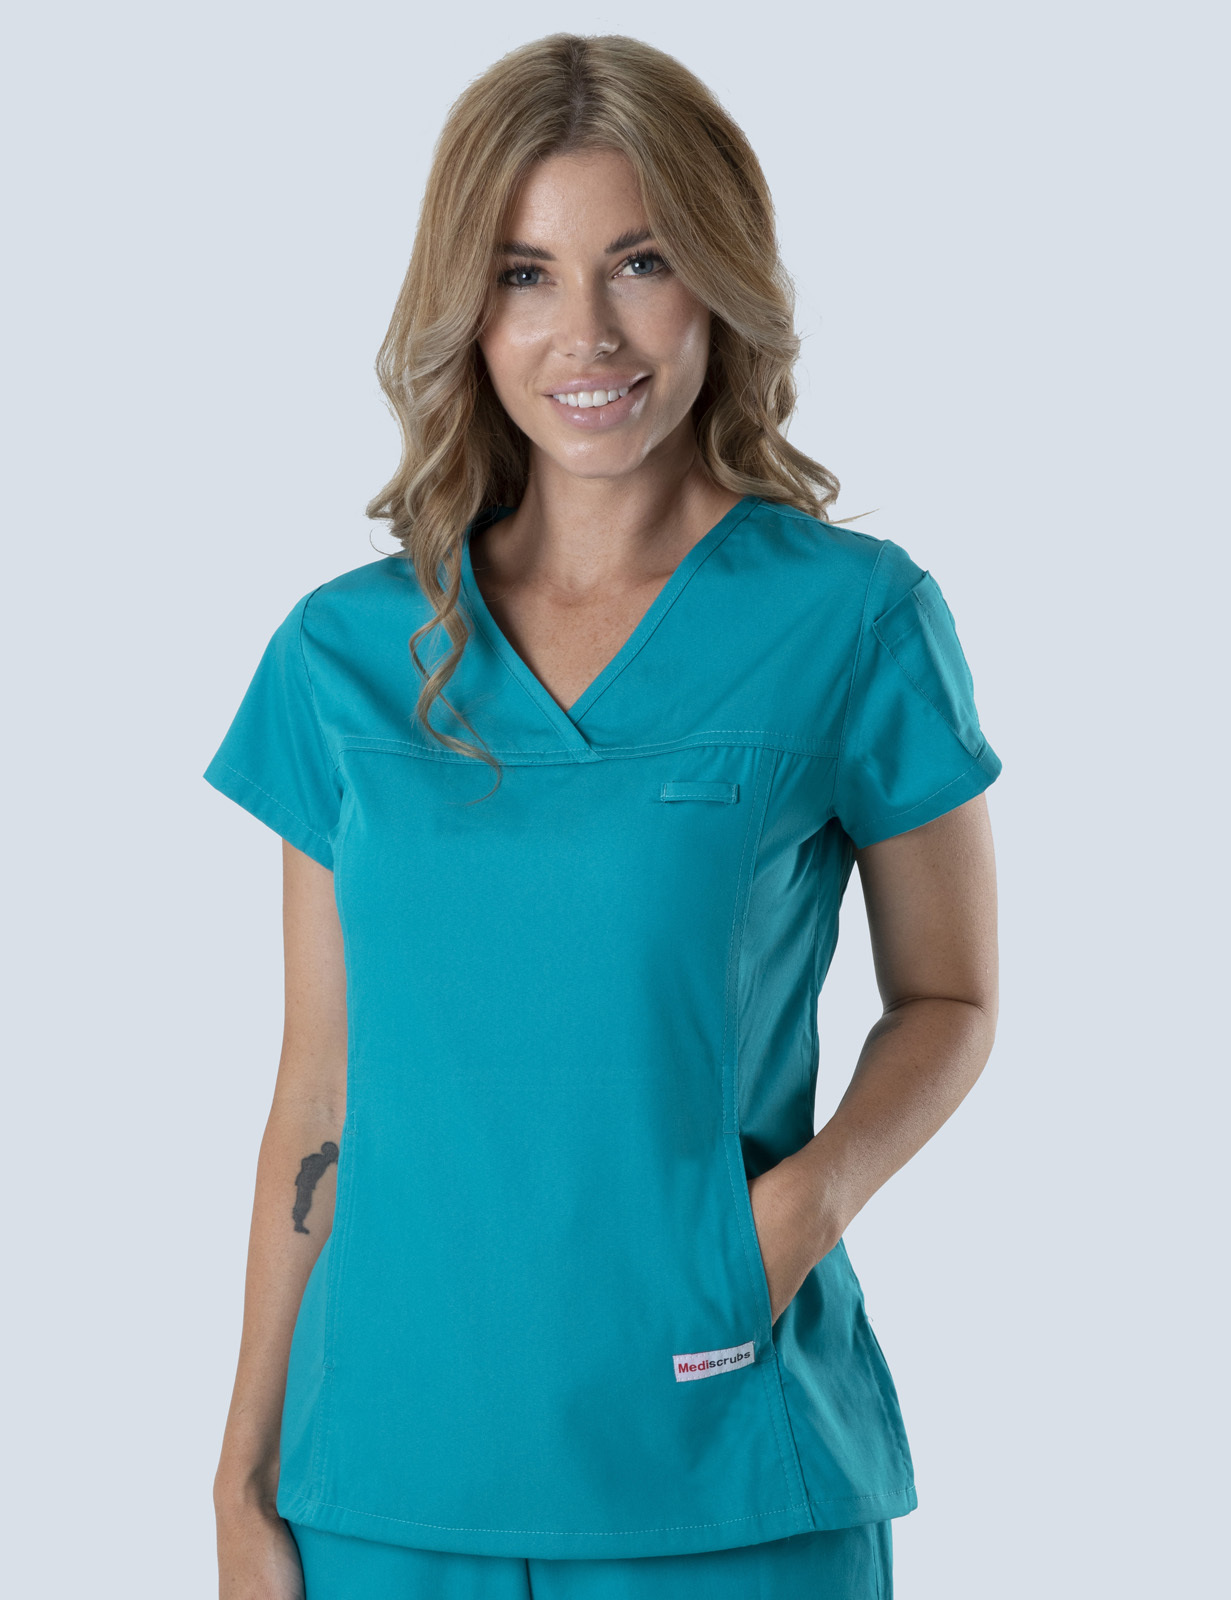 Caboolture Hospital - ICU CN (Women's Fit Solid Scrub Top in Teal incl Logos)